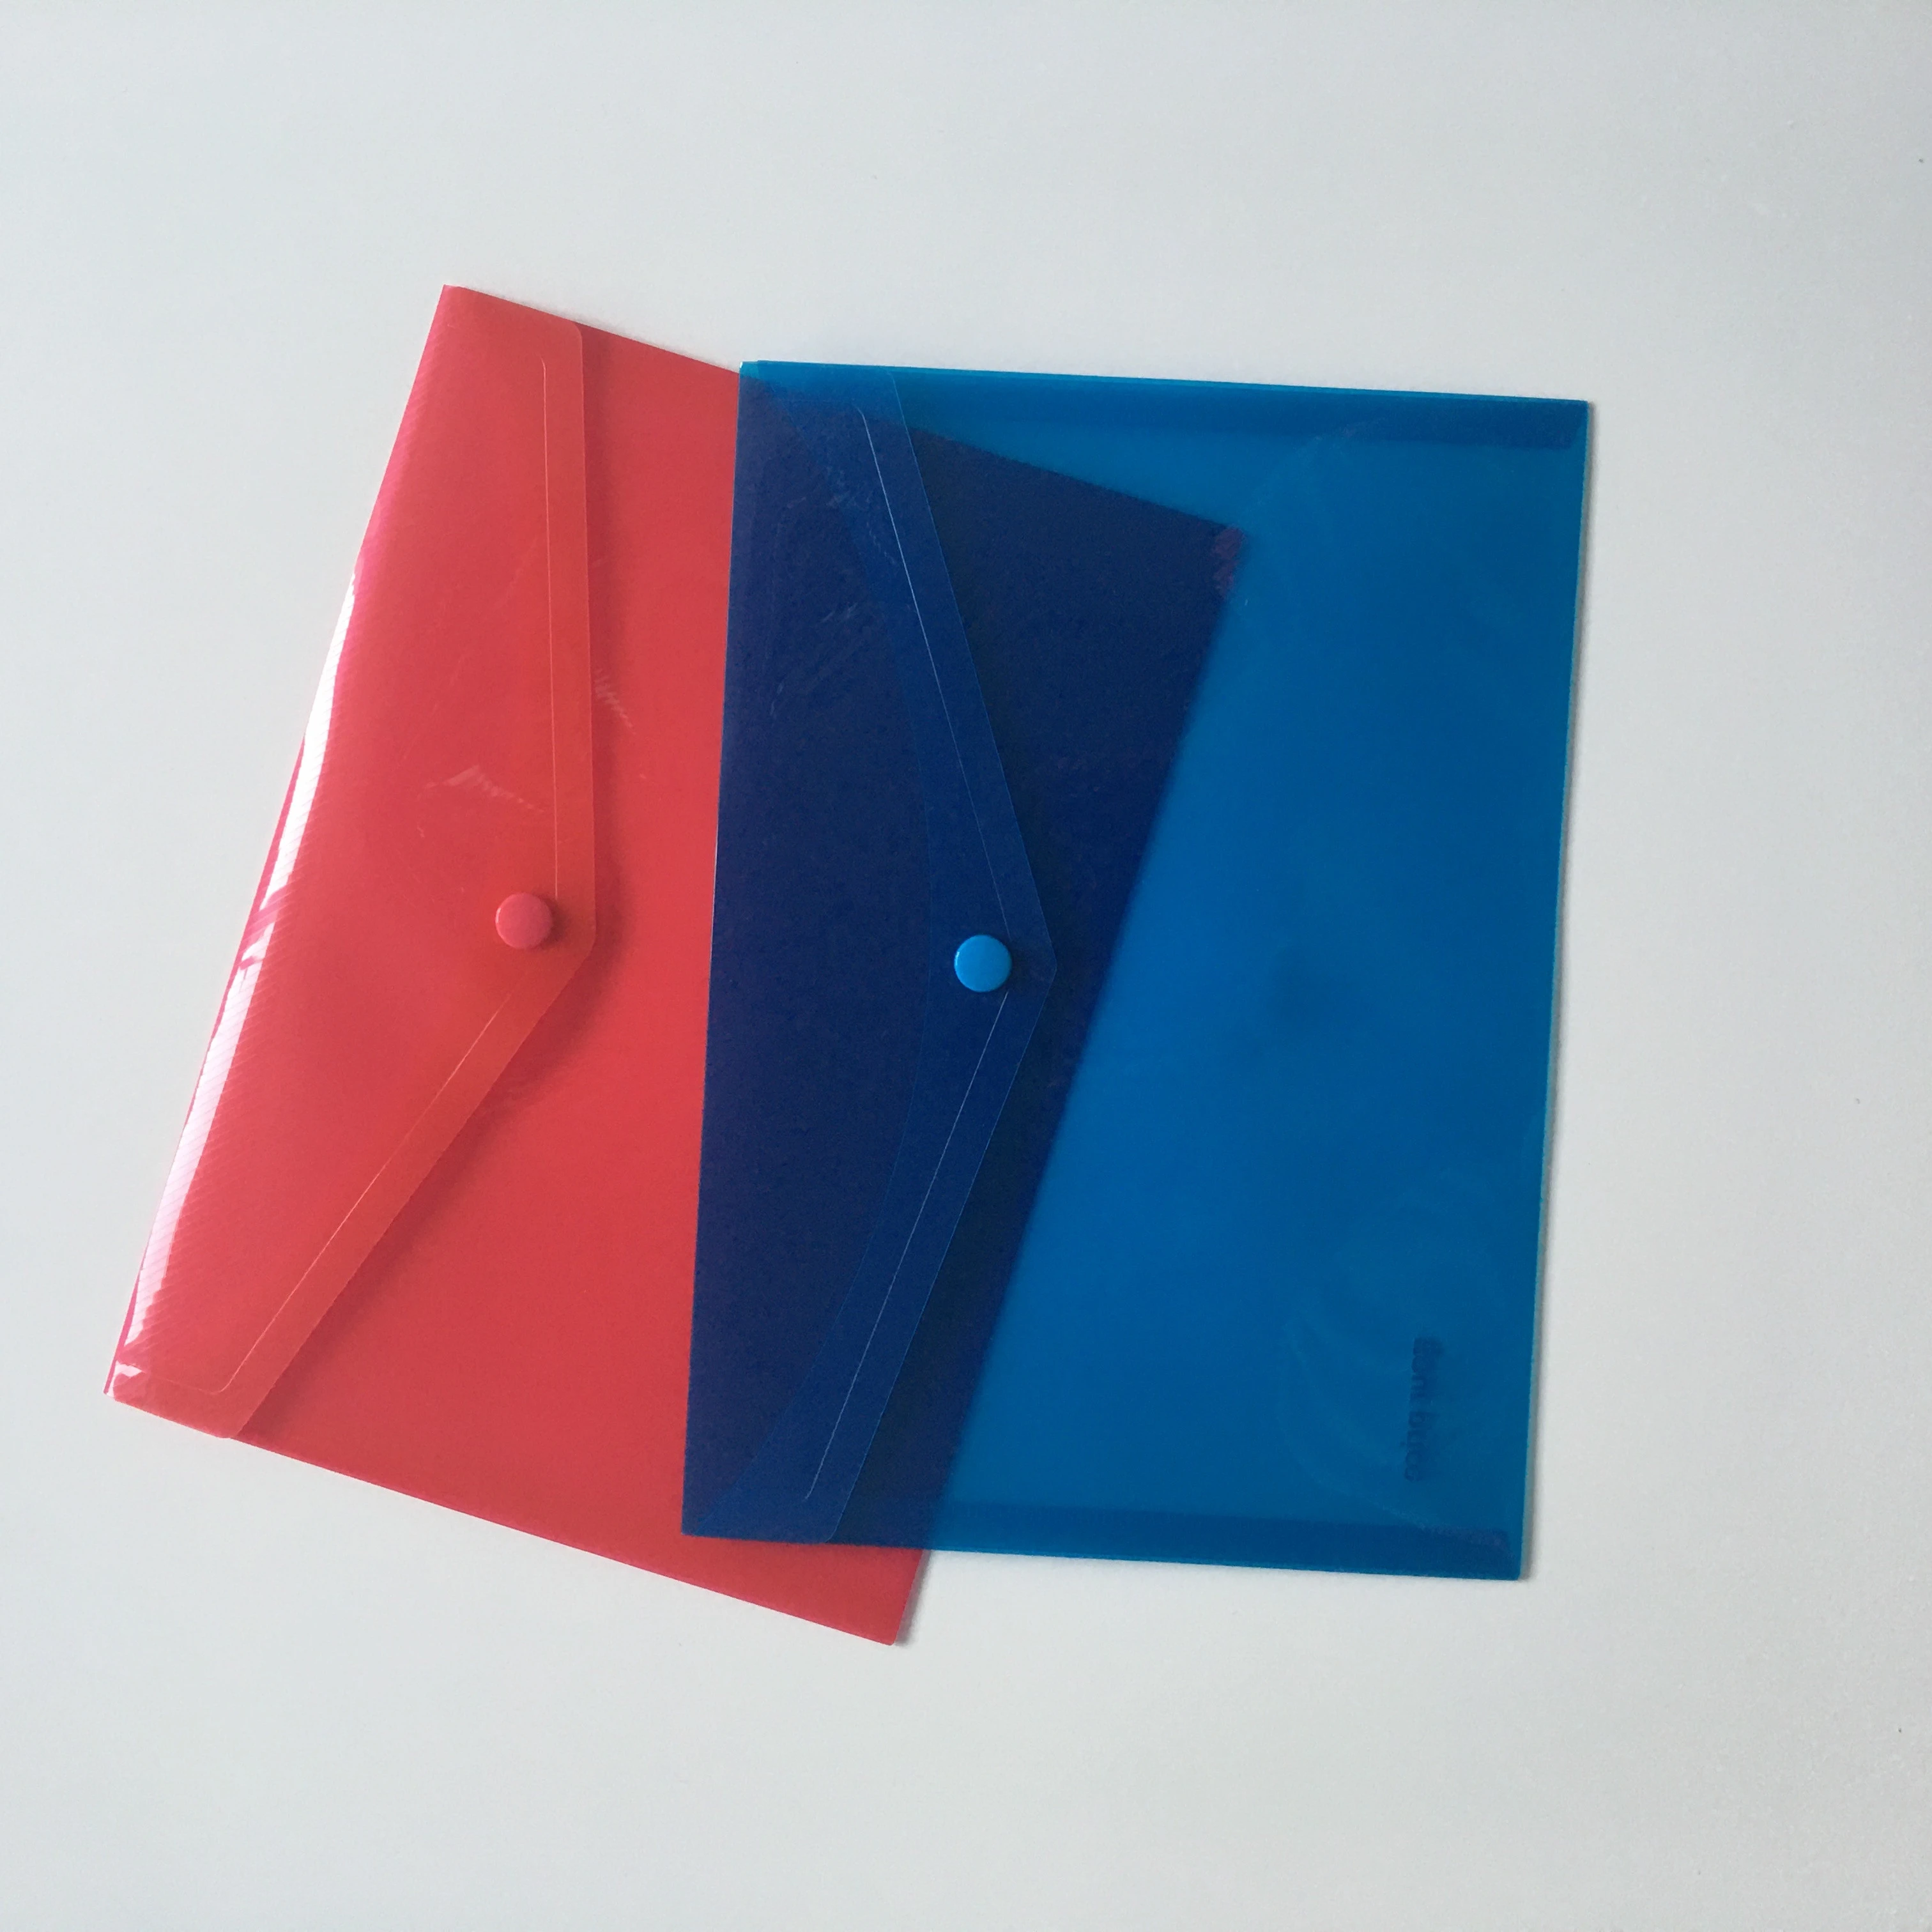 2021 Costomized Plastic Stationery A5 Size PP Document File Envelope File, Assorted colors, 200micron, Pack 5pcs